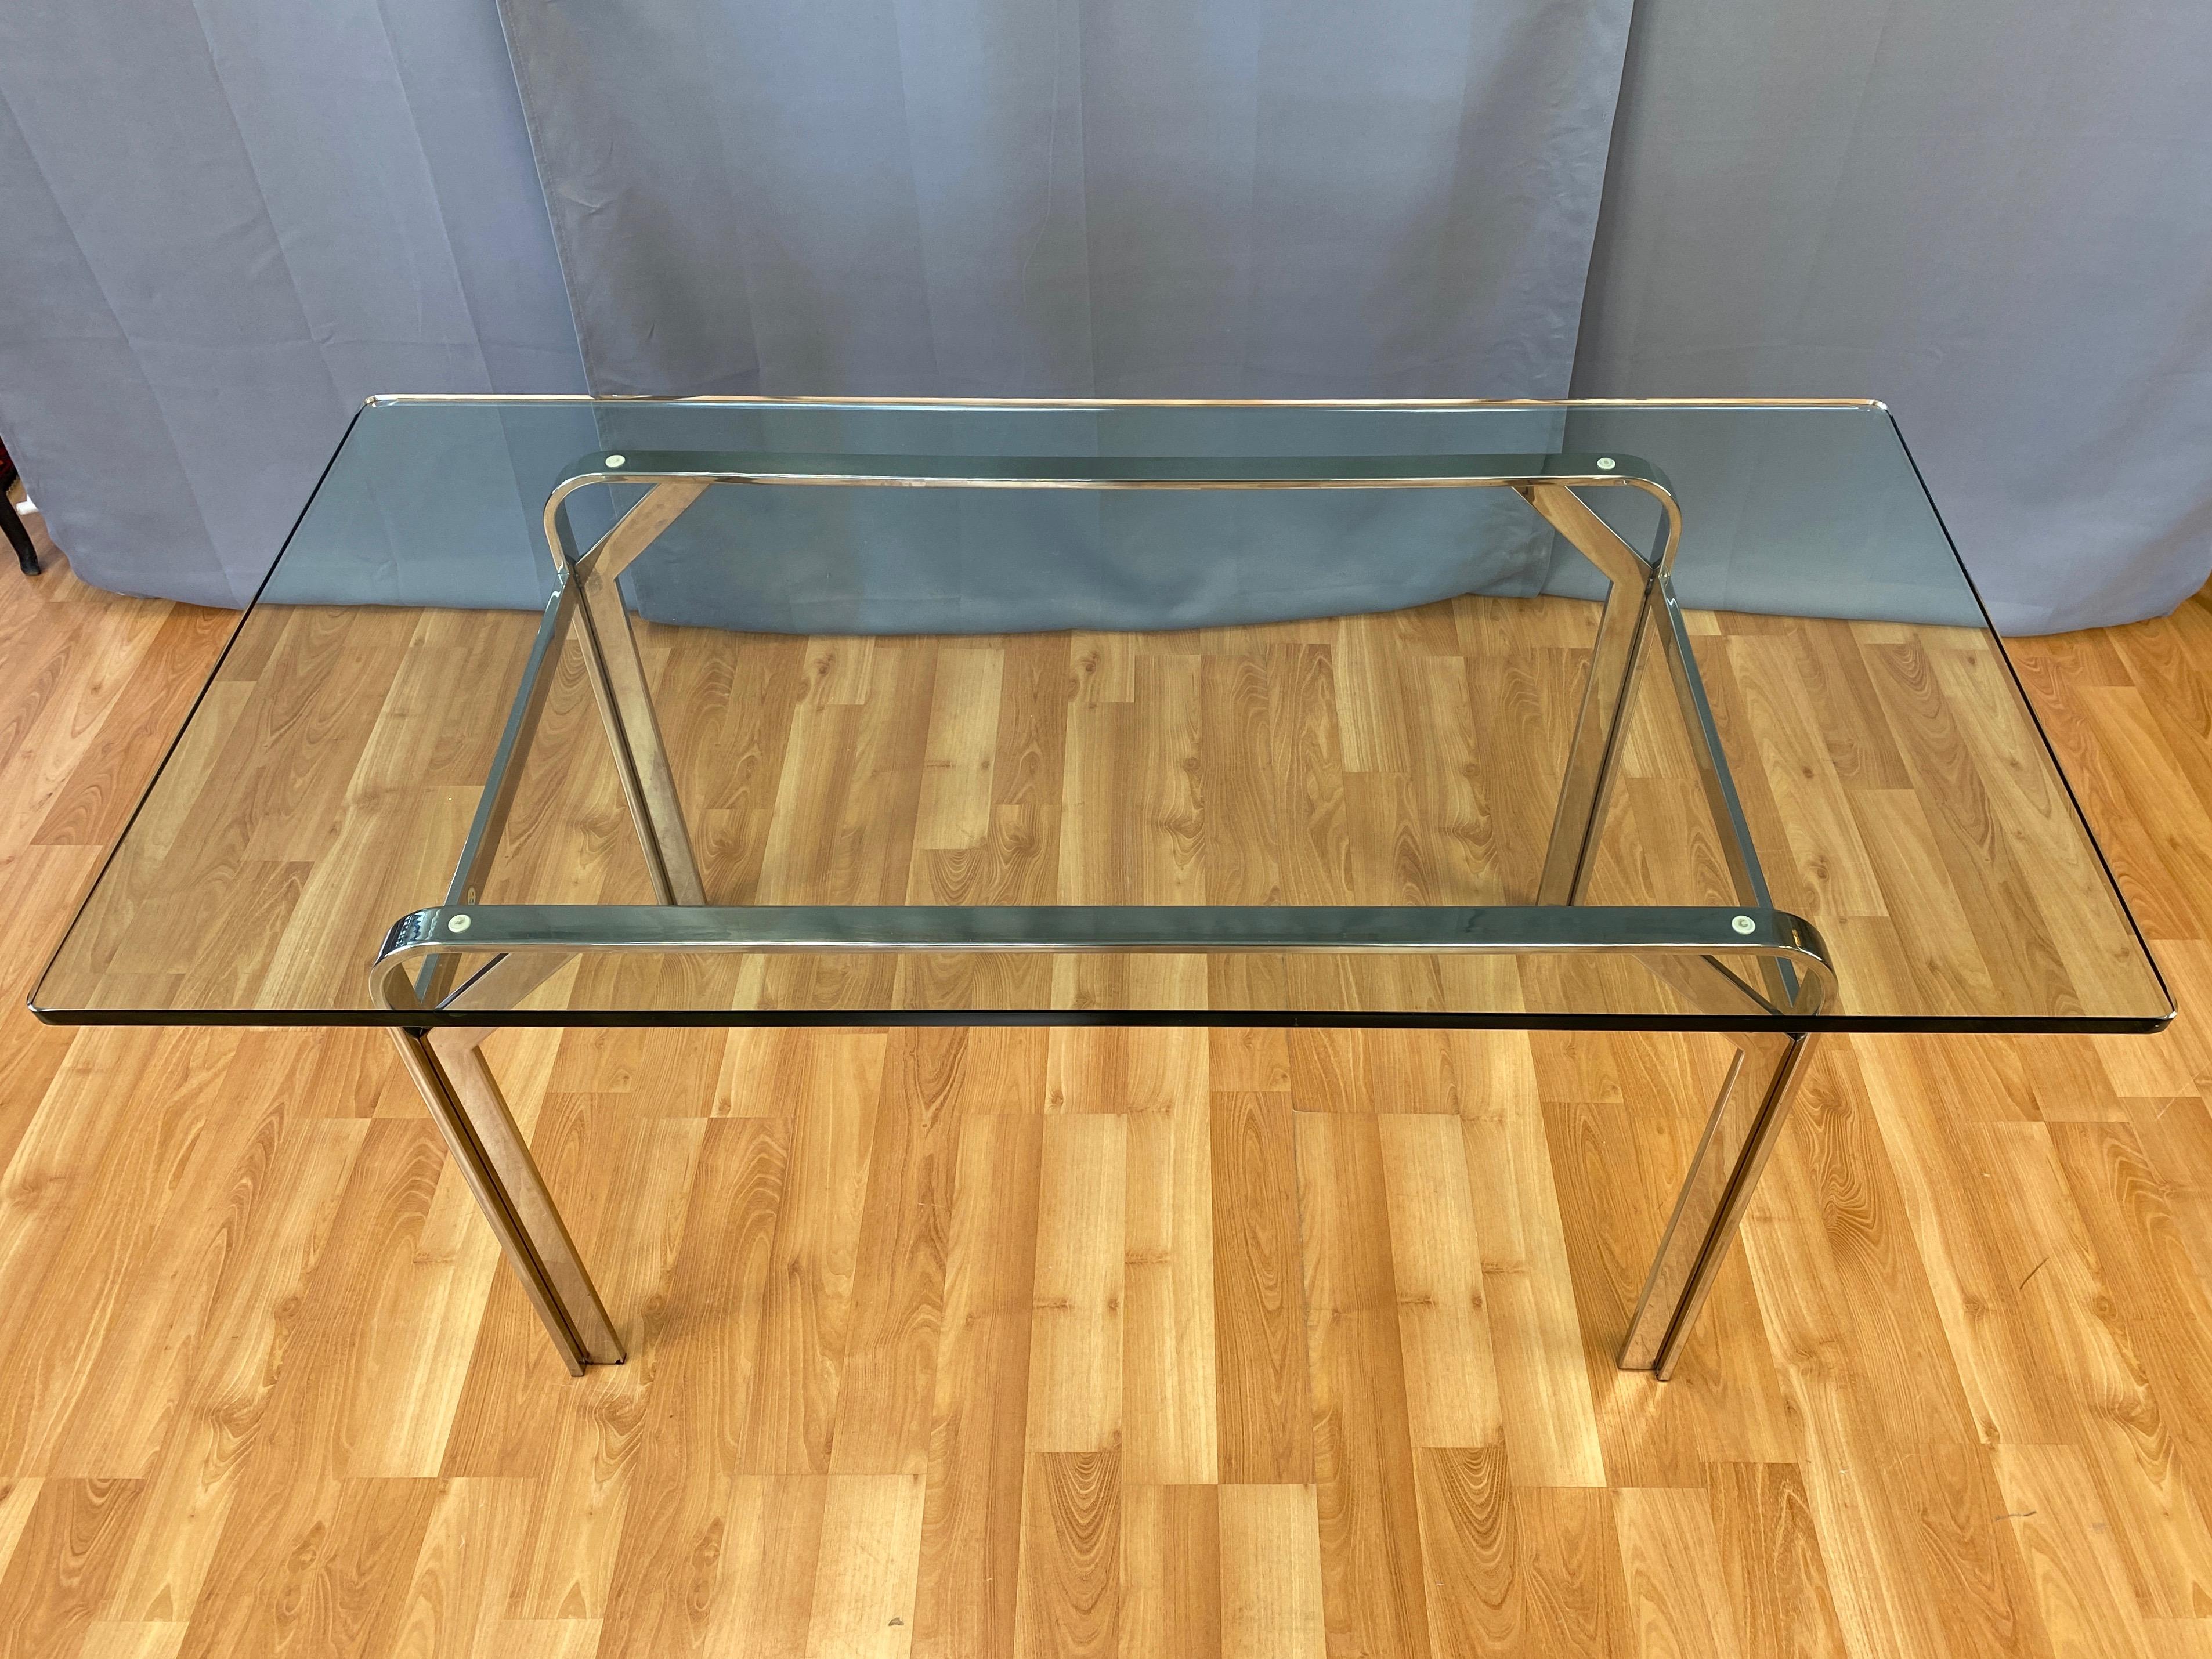 Late 20th Century Steelcase Polished Nickel-Plated Steel Desk or Table with Glass Top, 1970s